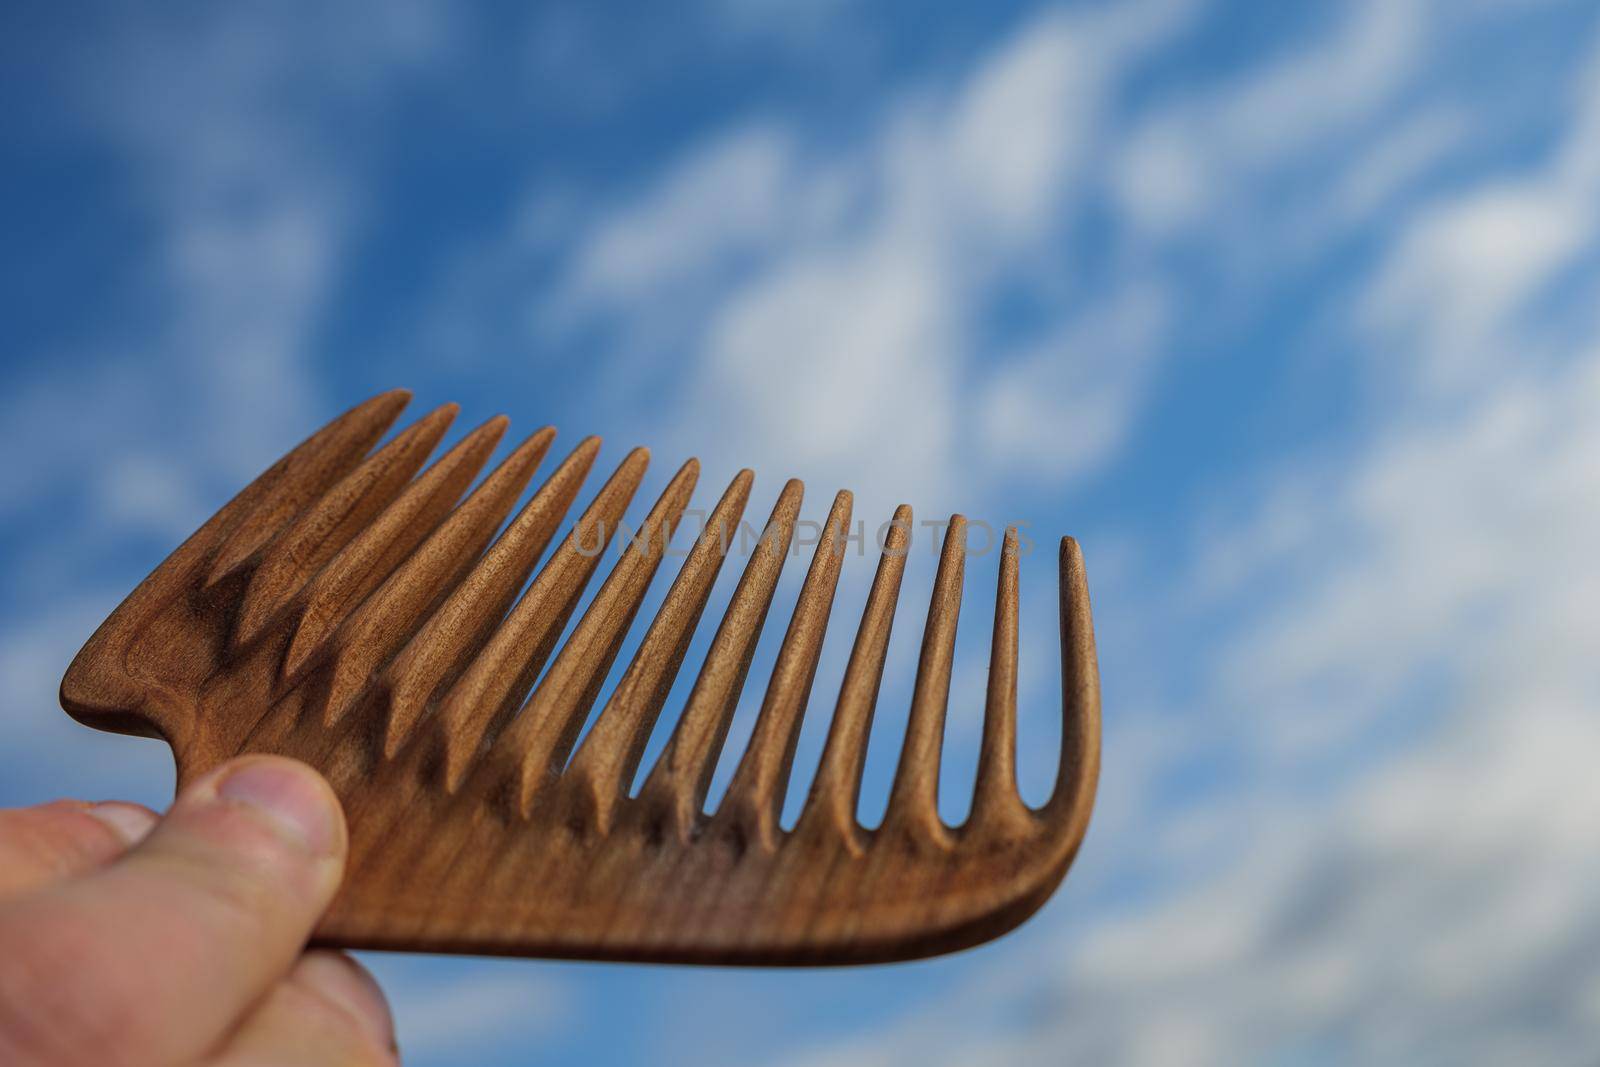 Handmade wooden comb for scalp massage and hair combing at blue sky background. Hair care concept. by apavlin